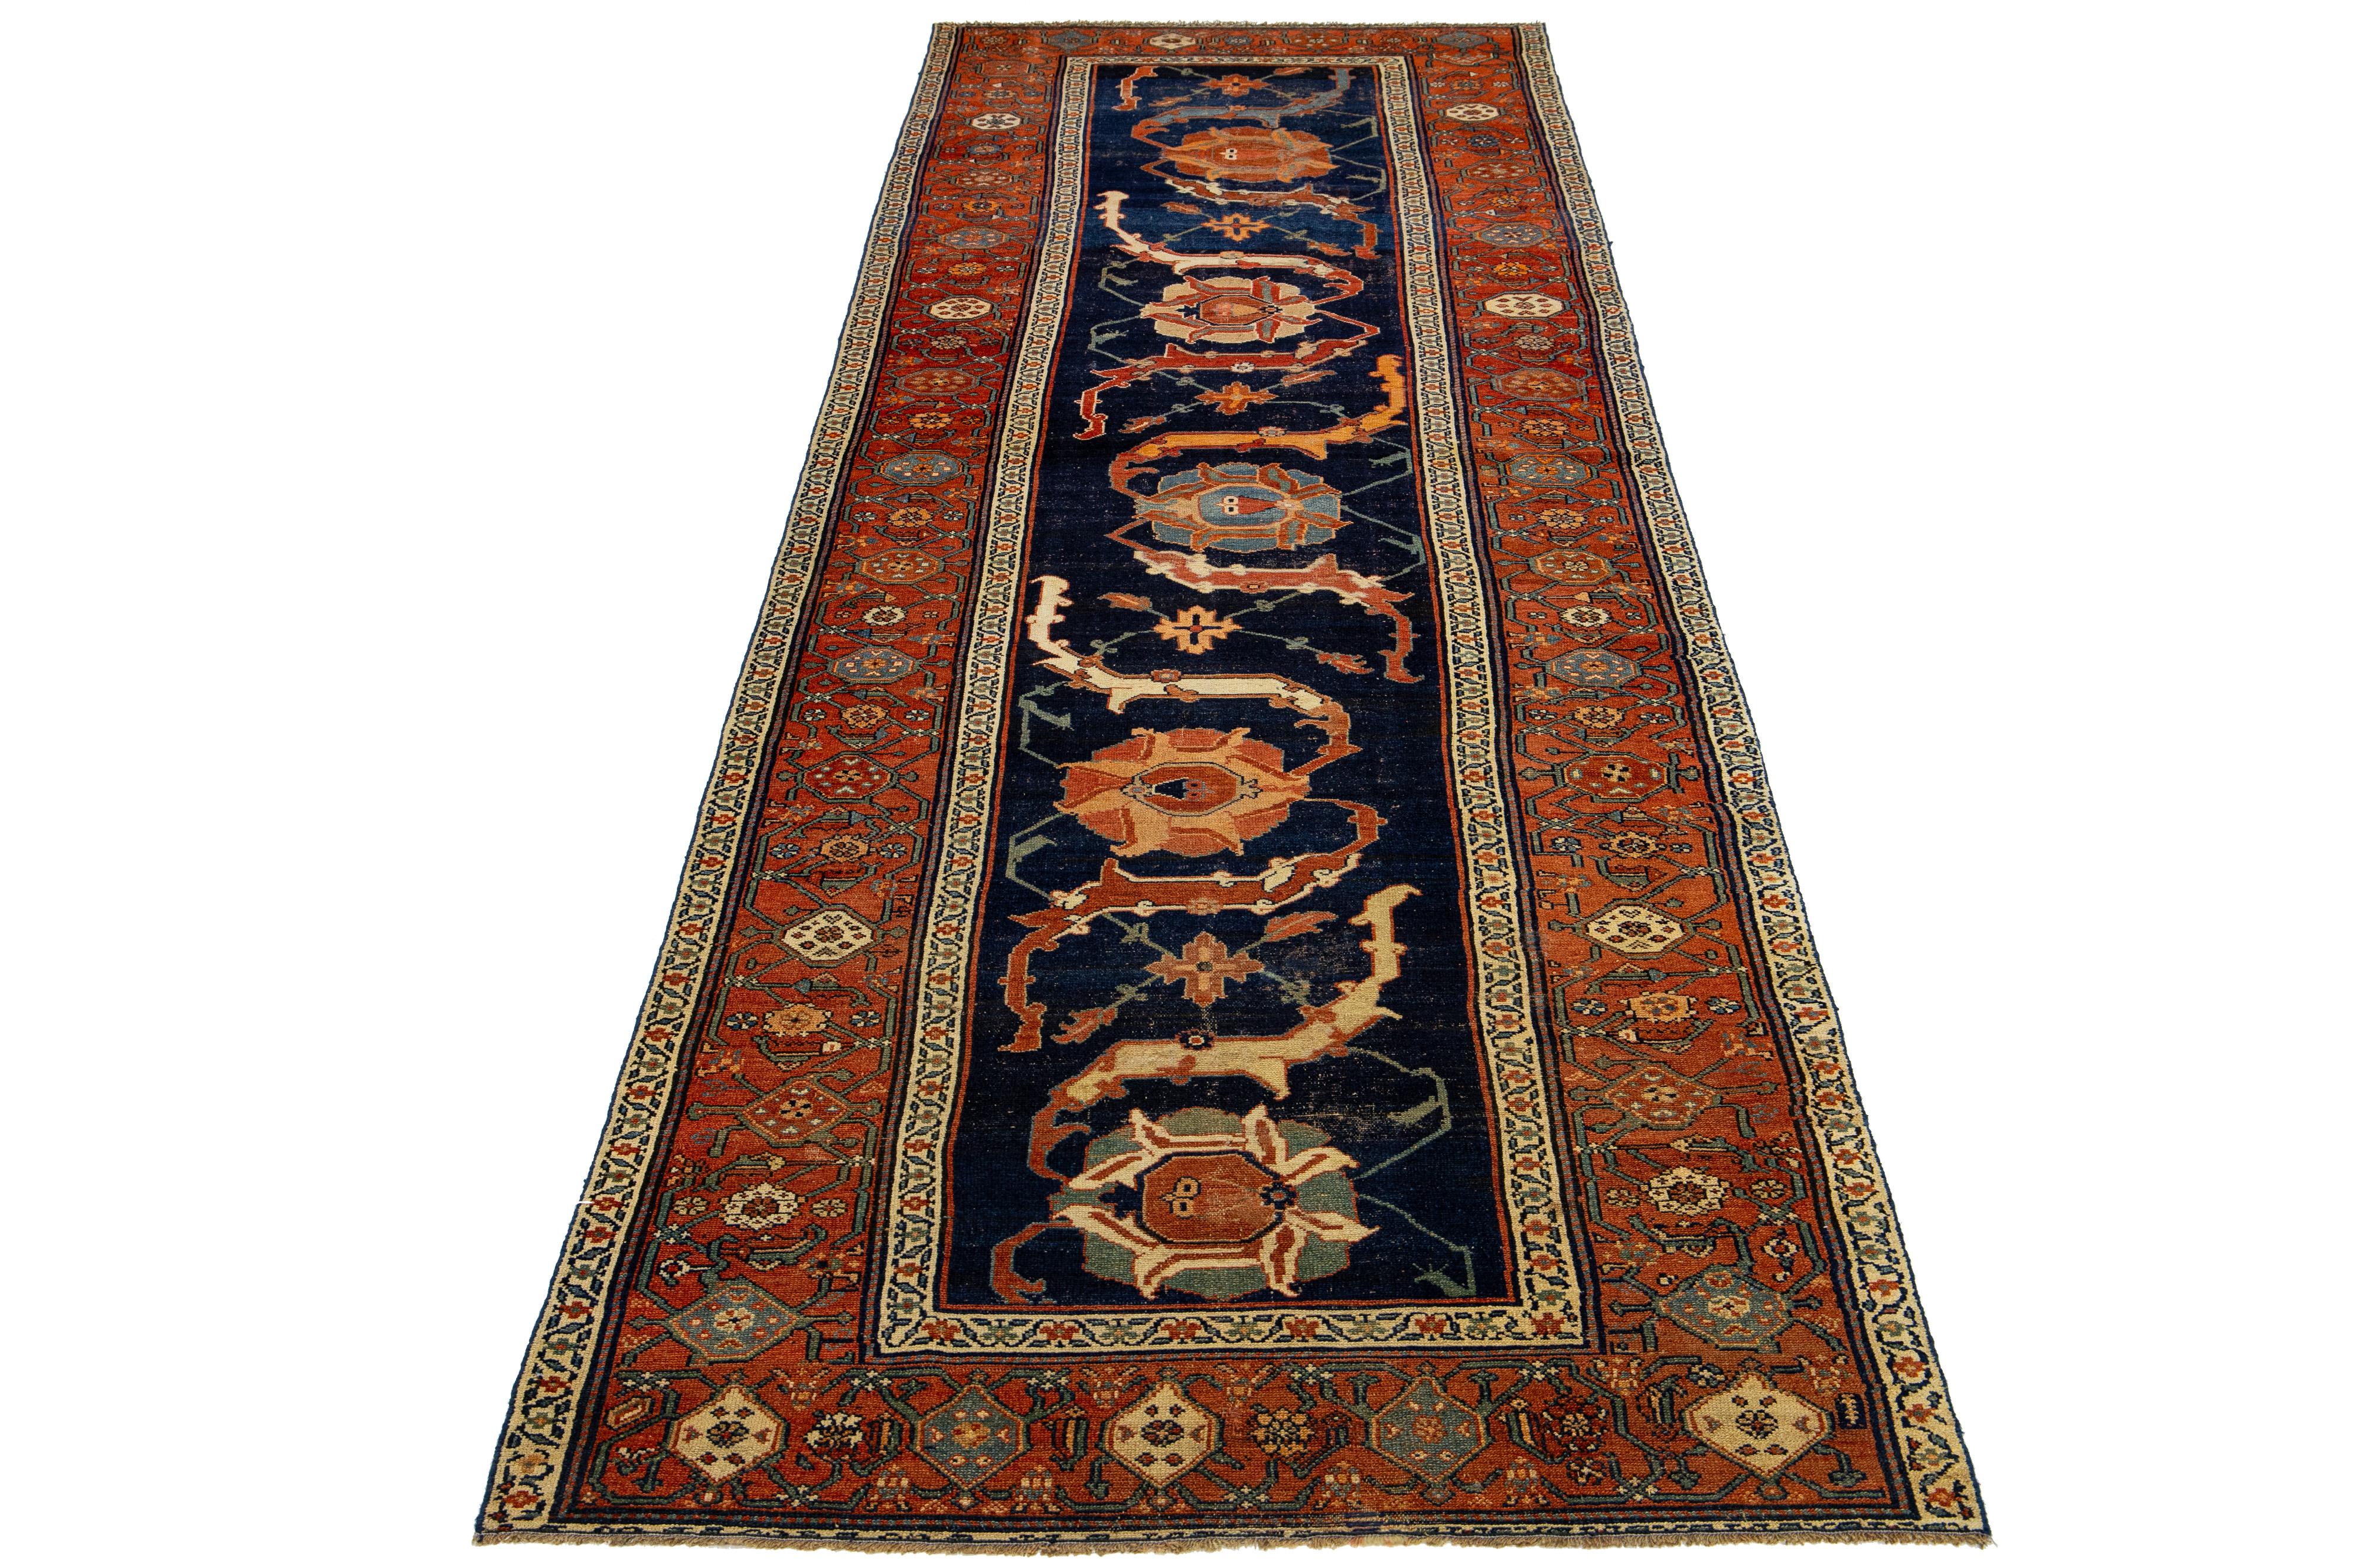 This Persian Malayer wool rug exudes an antique charm. It showcases hand-knotted wool in a navy blue field with an allover pattern embellished with accents of rust, beige, and orange.

This rug measures 4'6